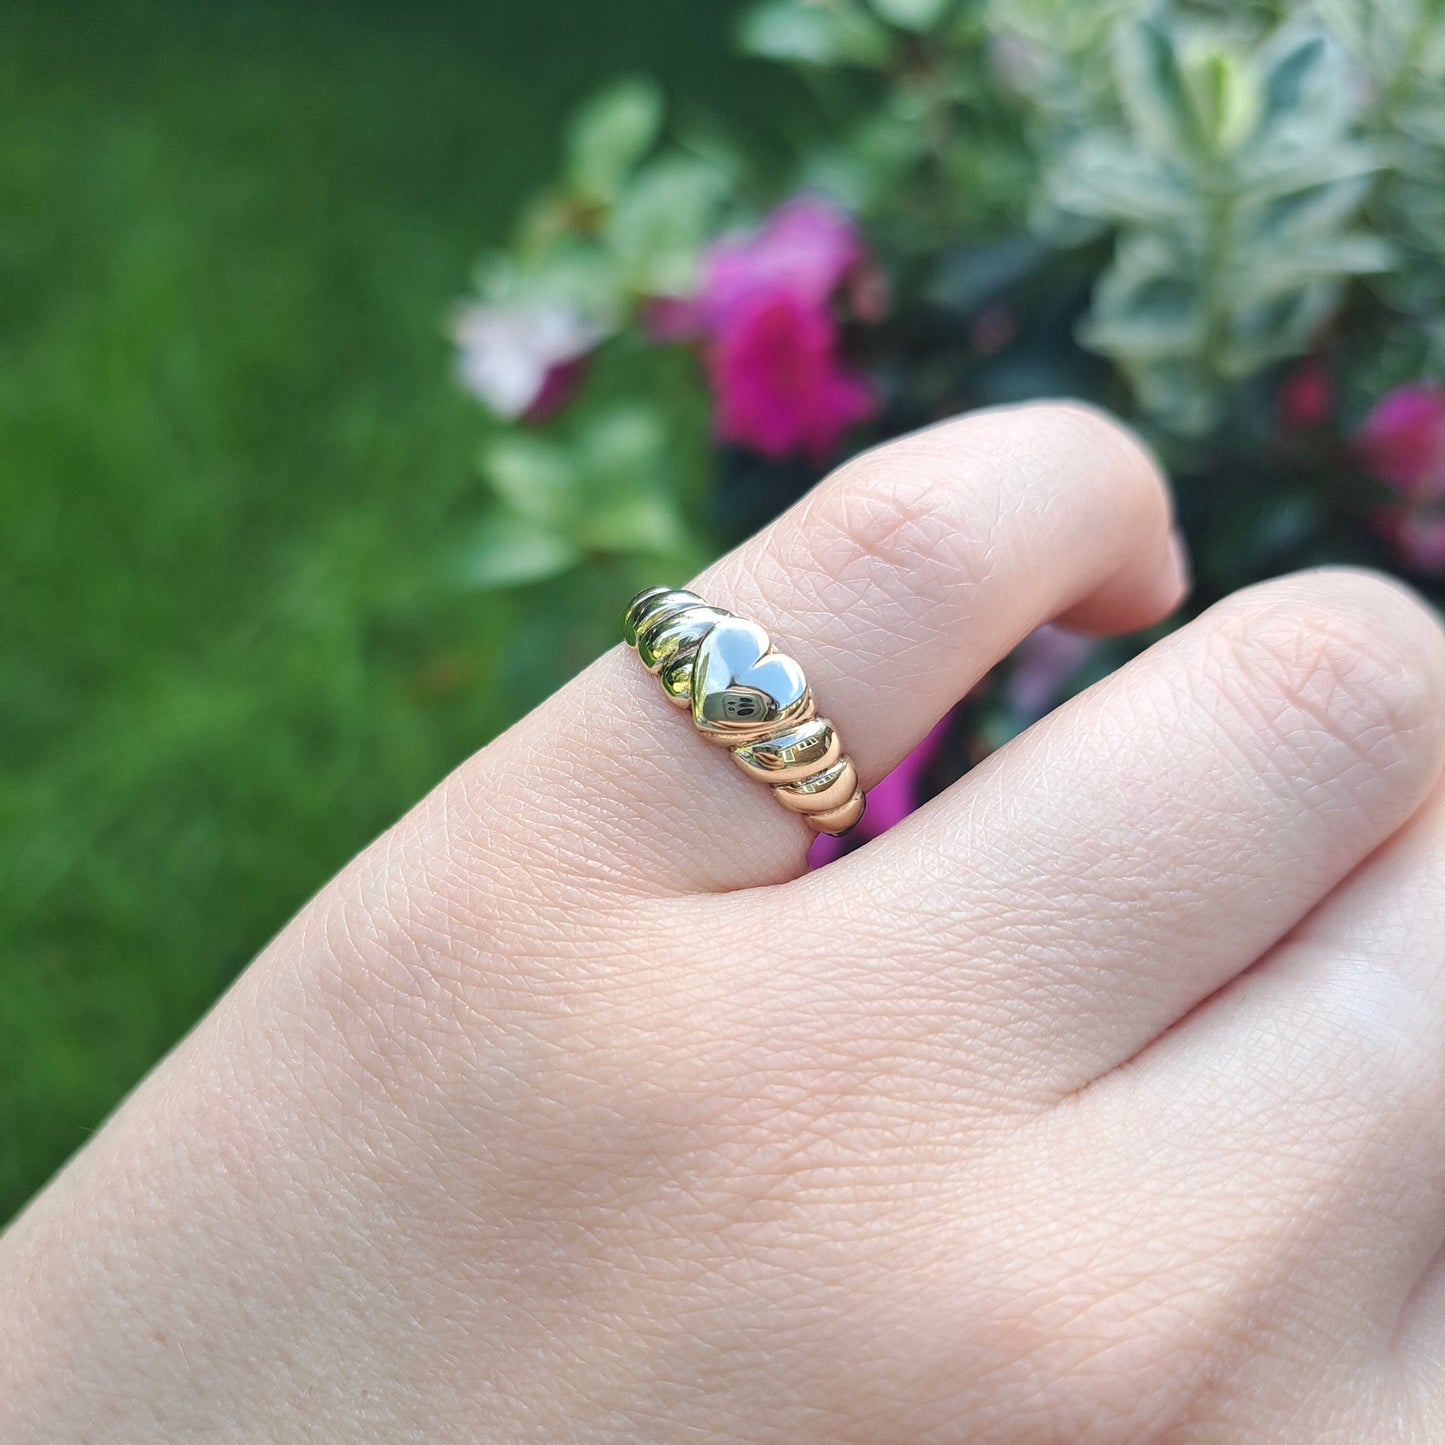 vintage 9ct gold puffy heart ring